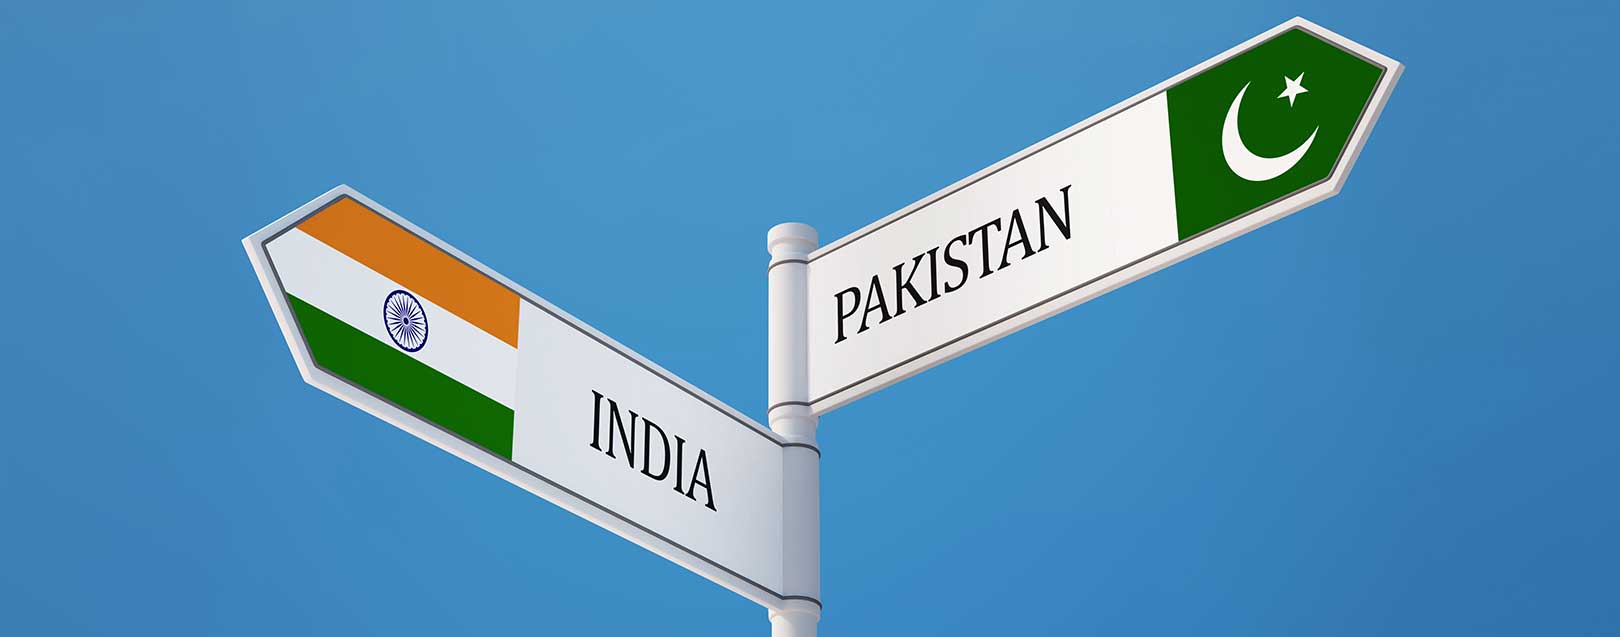 Pakistan aims $1bn exports to India within a year